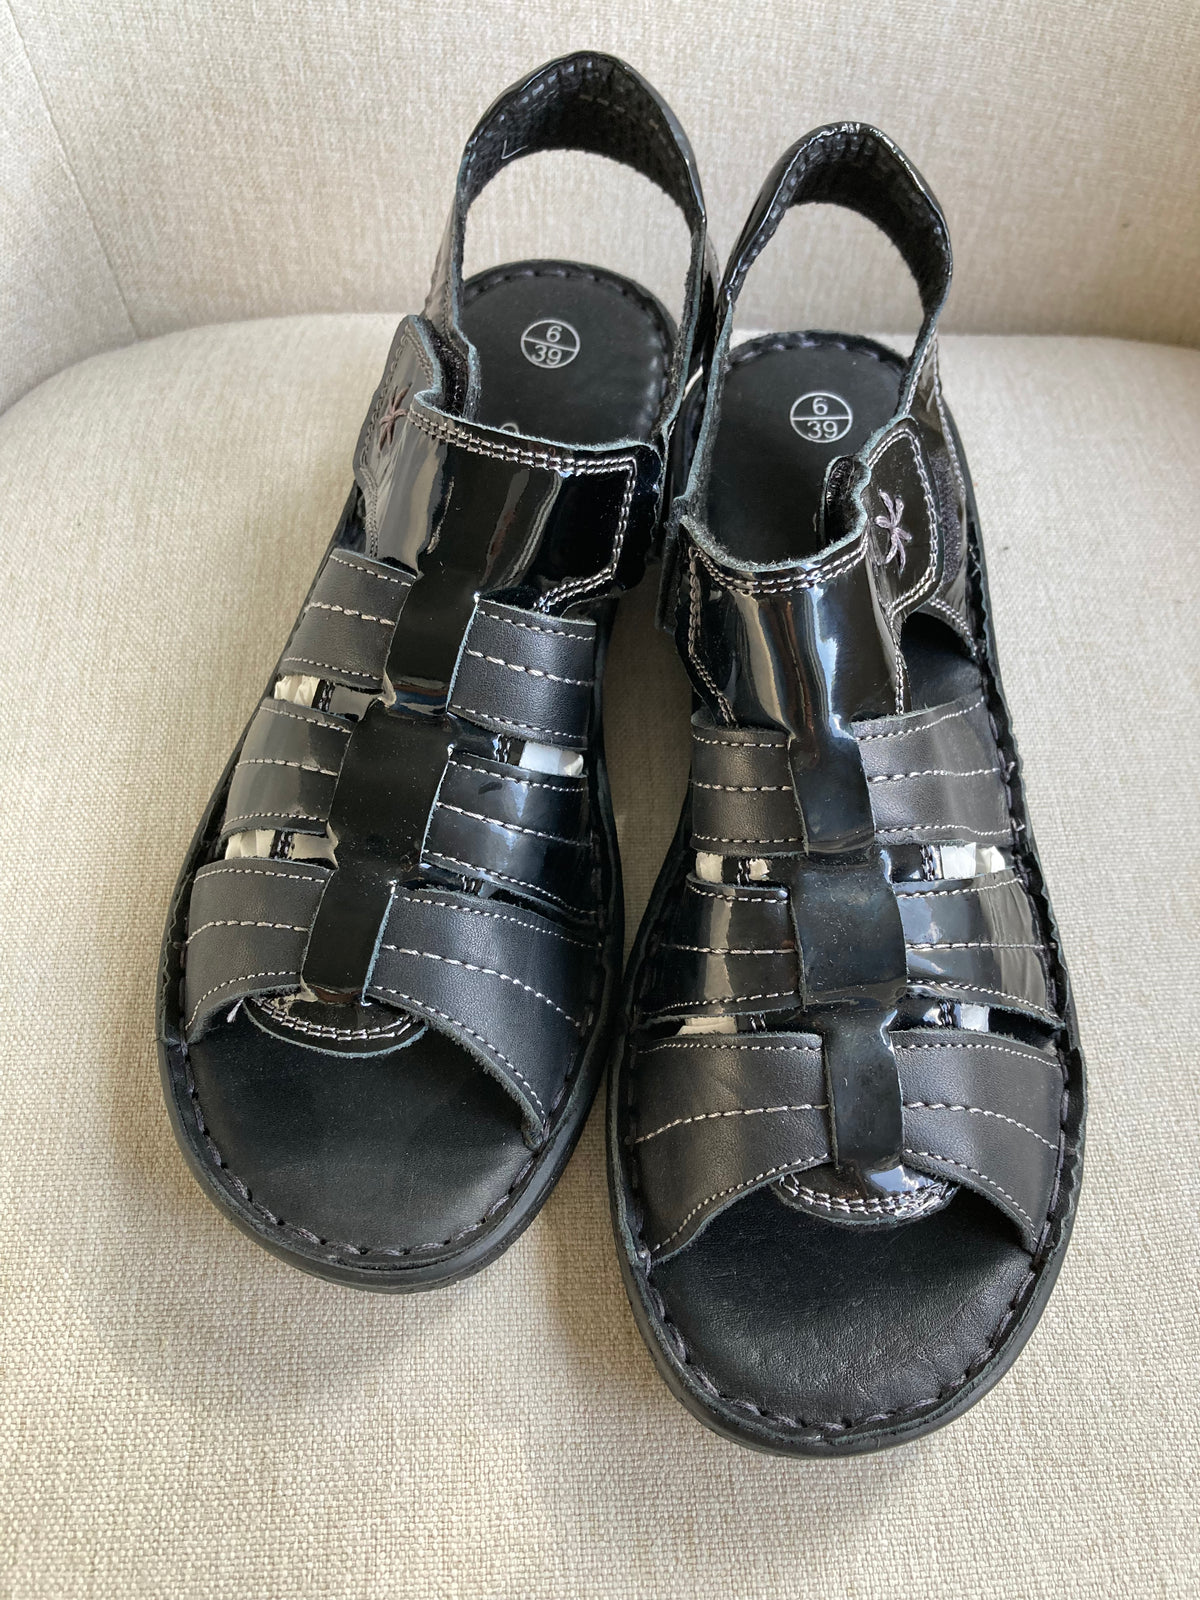 Black leather comfort sandals by Airsoft size 6